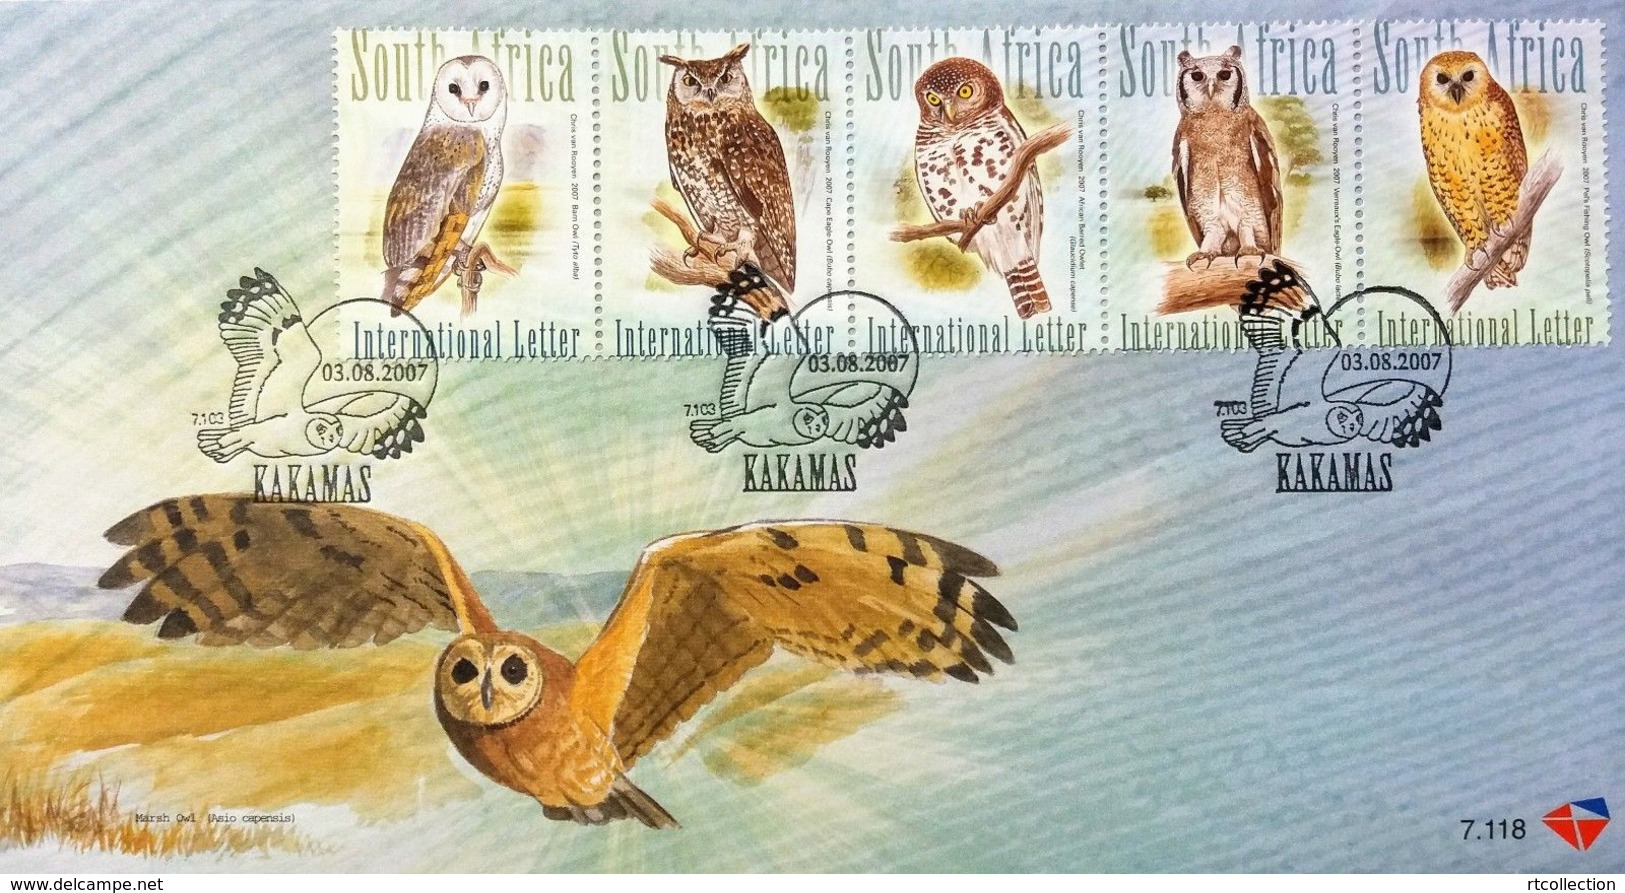 South Africa 2007 First Day Cover FDC Birds Strip Owls Animals Bird Owl Nature Date 3/8/2007 Stamps - Owls